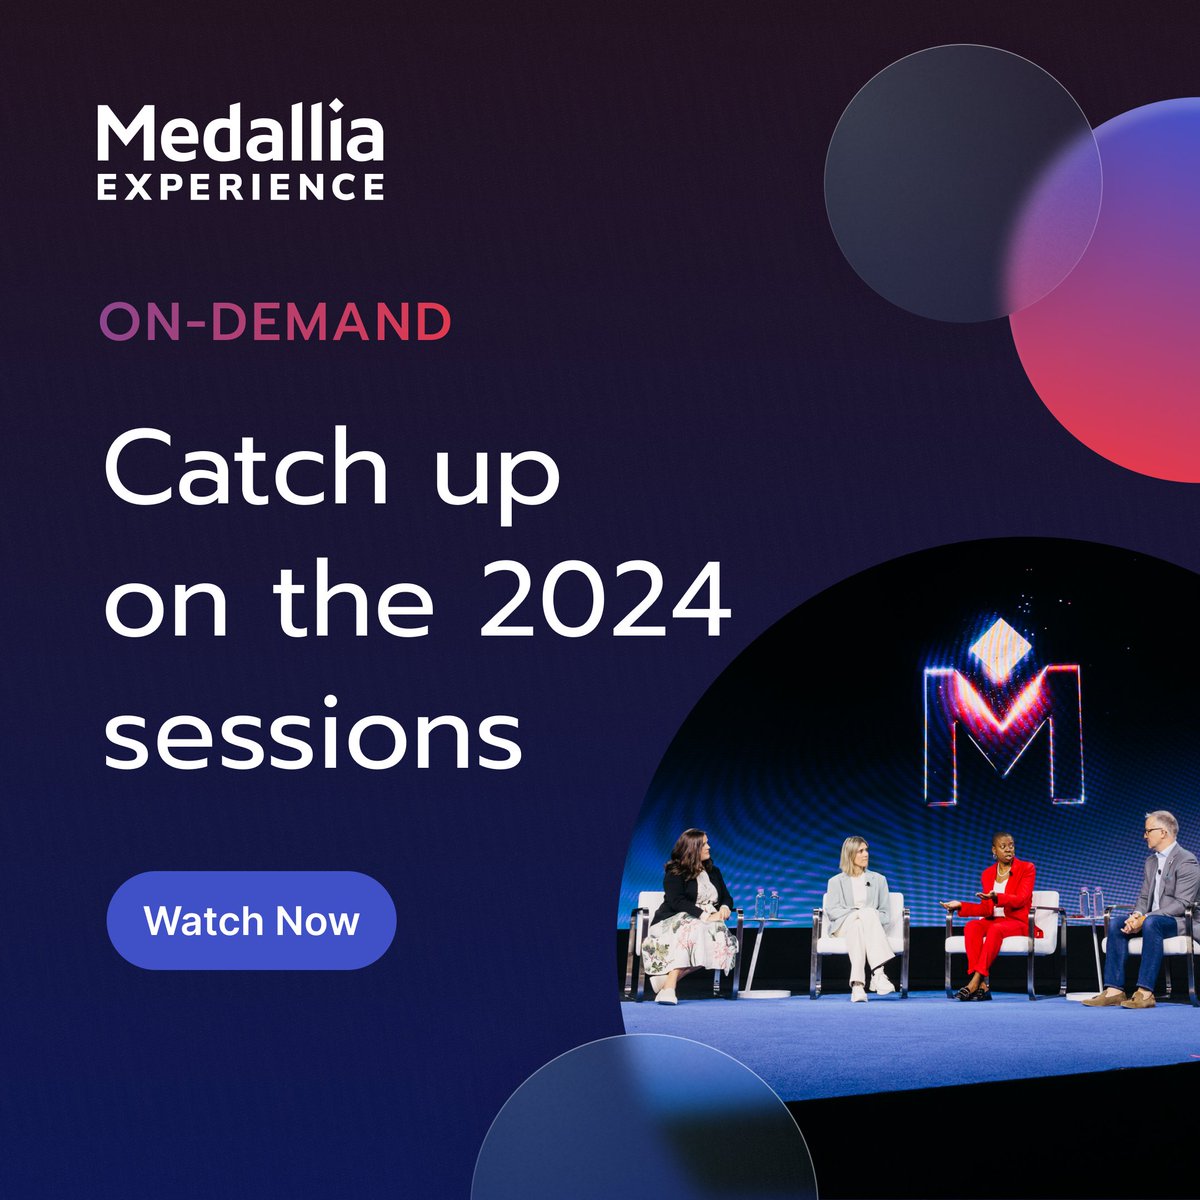 Couldn’t make it to Vegas for #MedalliaEXP? Catch all the action with the breakout sessions now available on #EXPNow! Dive into insights from top experts and industry leaders. 🍿 Watch now: bit.ly/49Q3Vqs